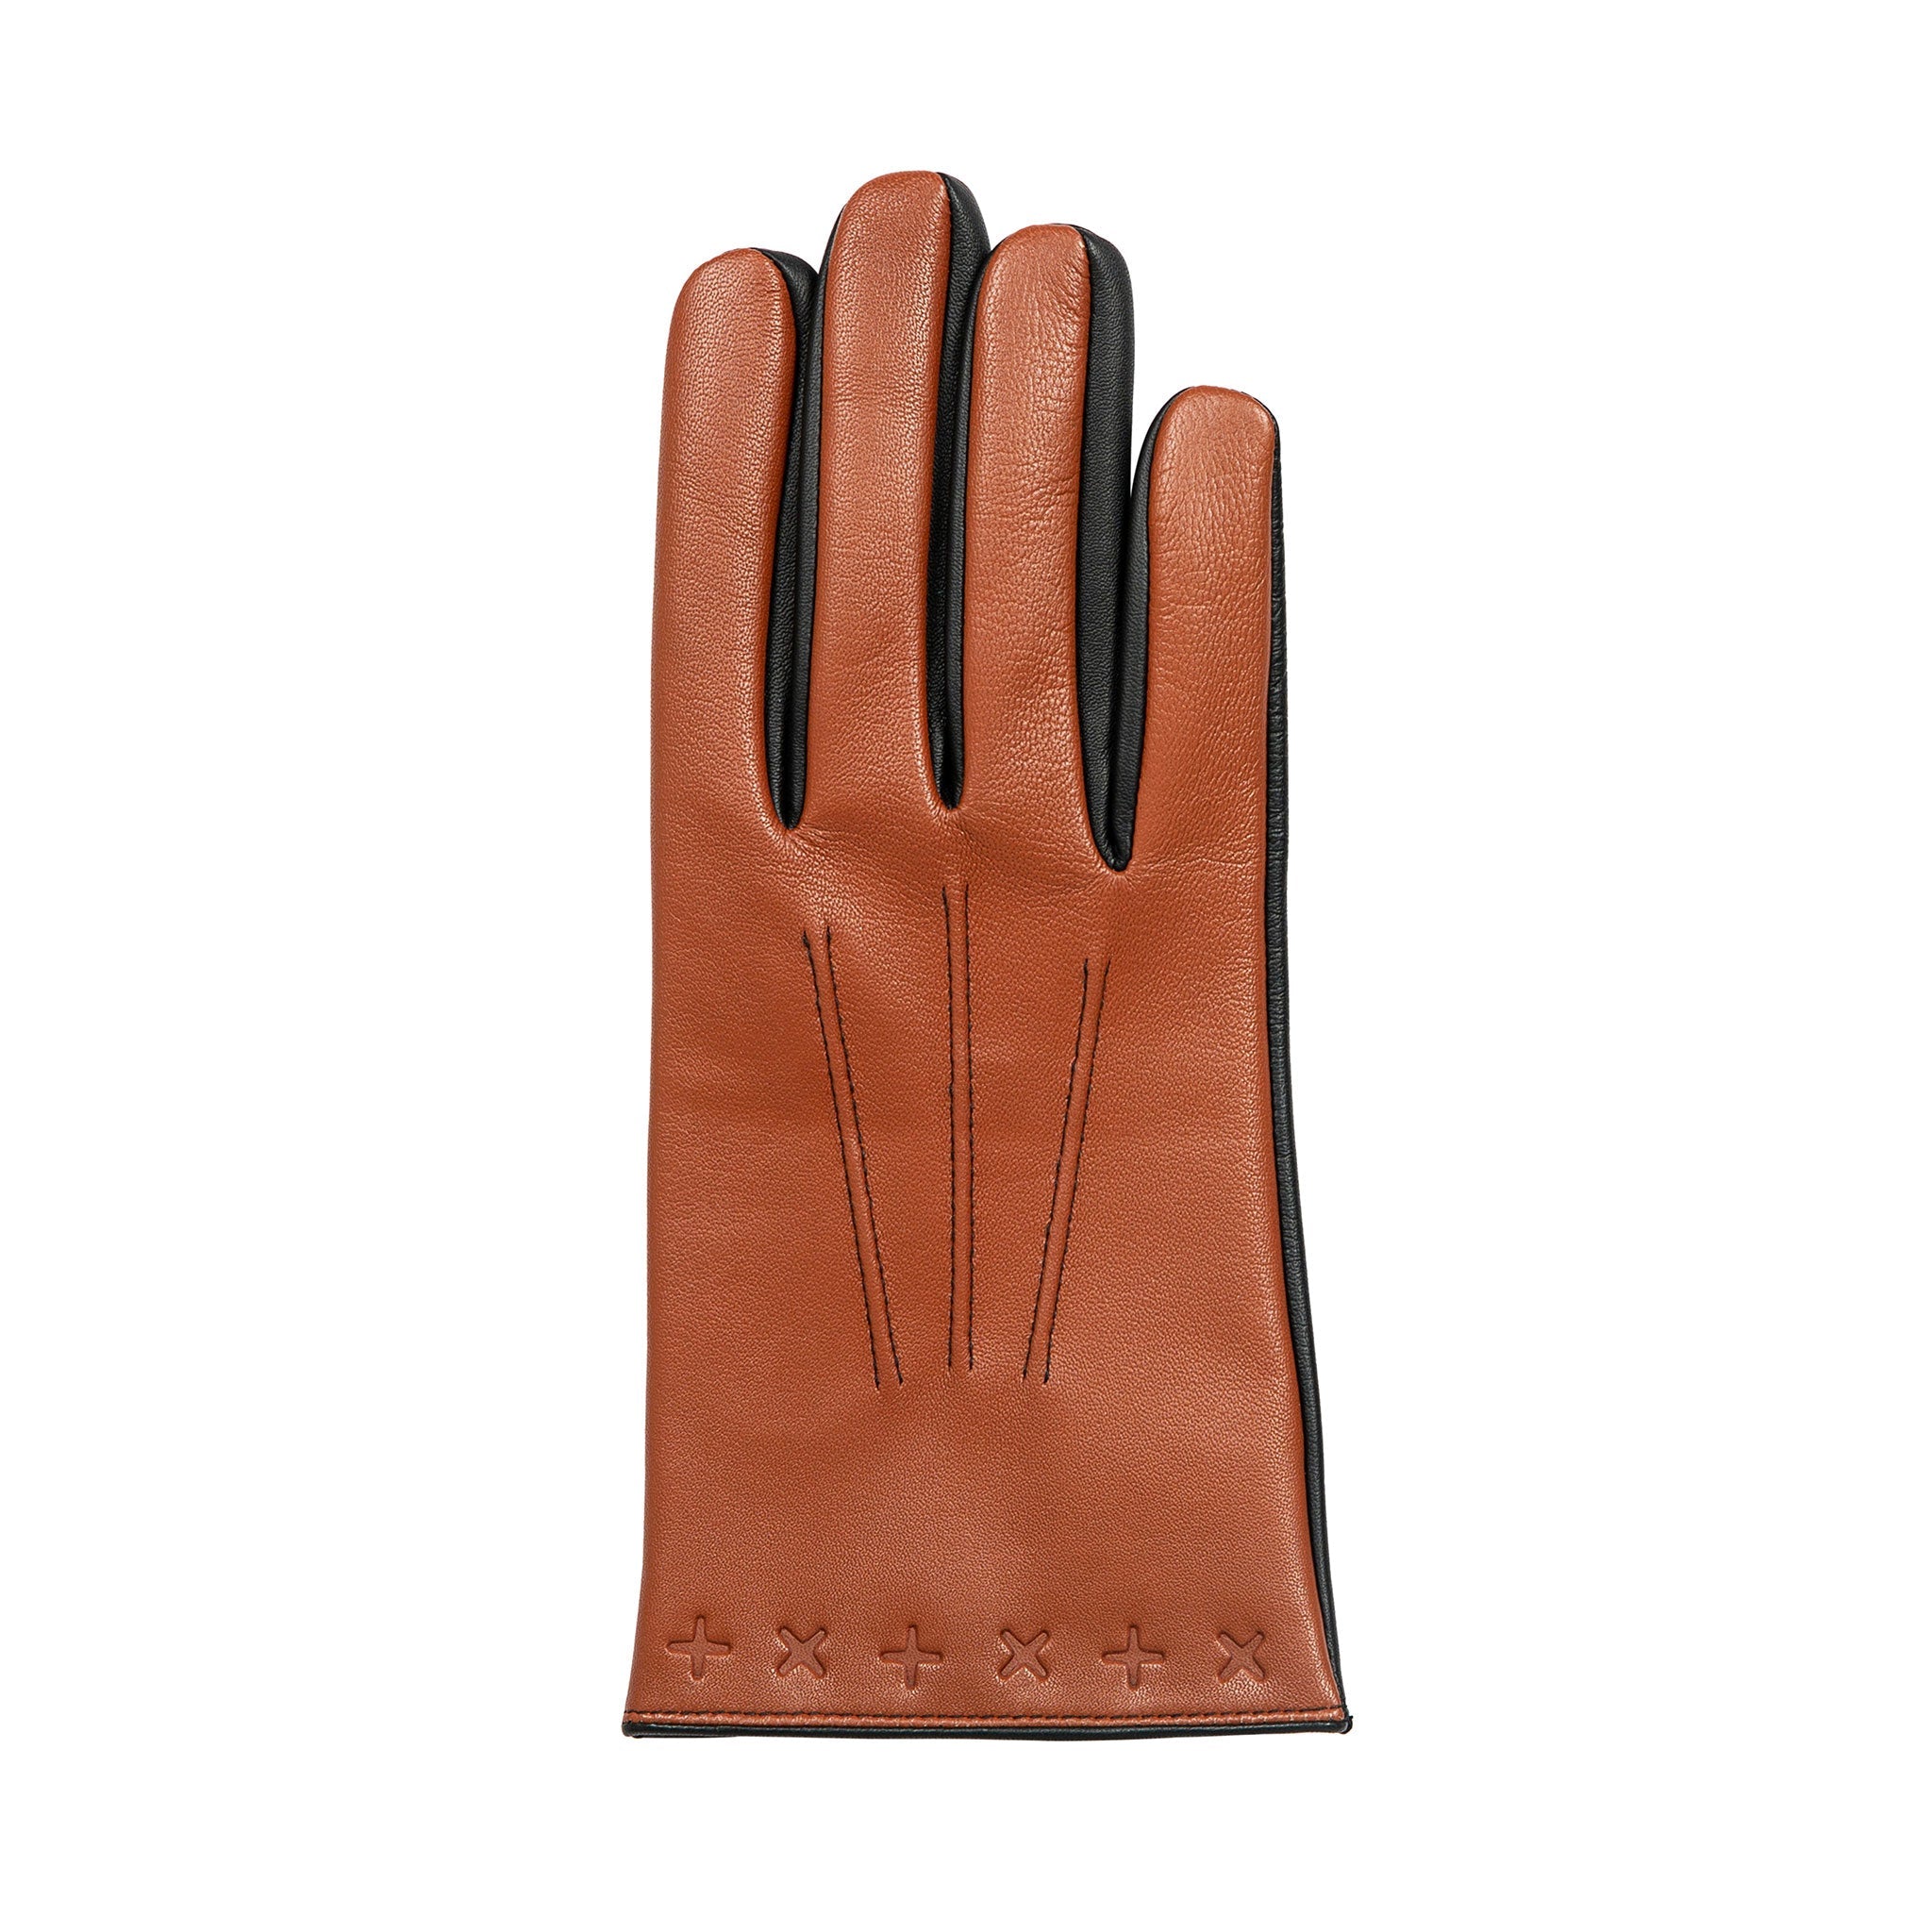 Lando | The Suited Racer x Dents Touchscreen Leather Embossed 